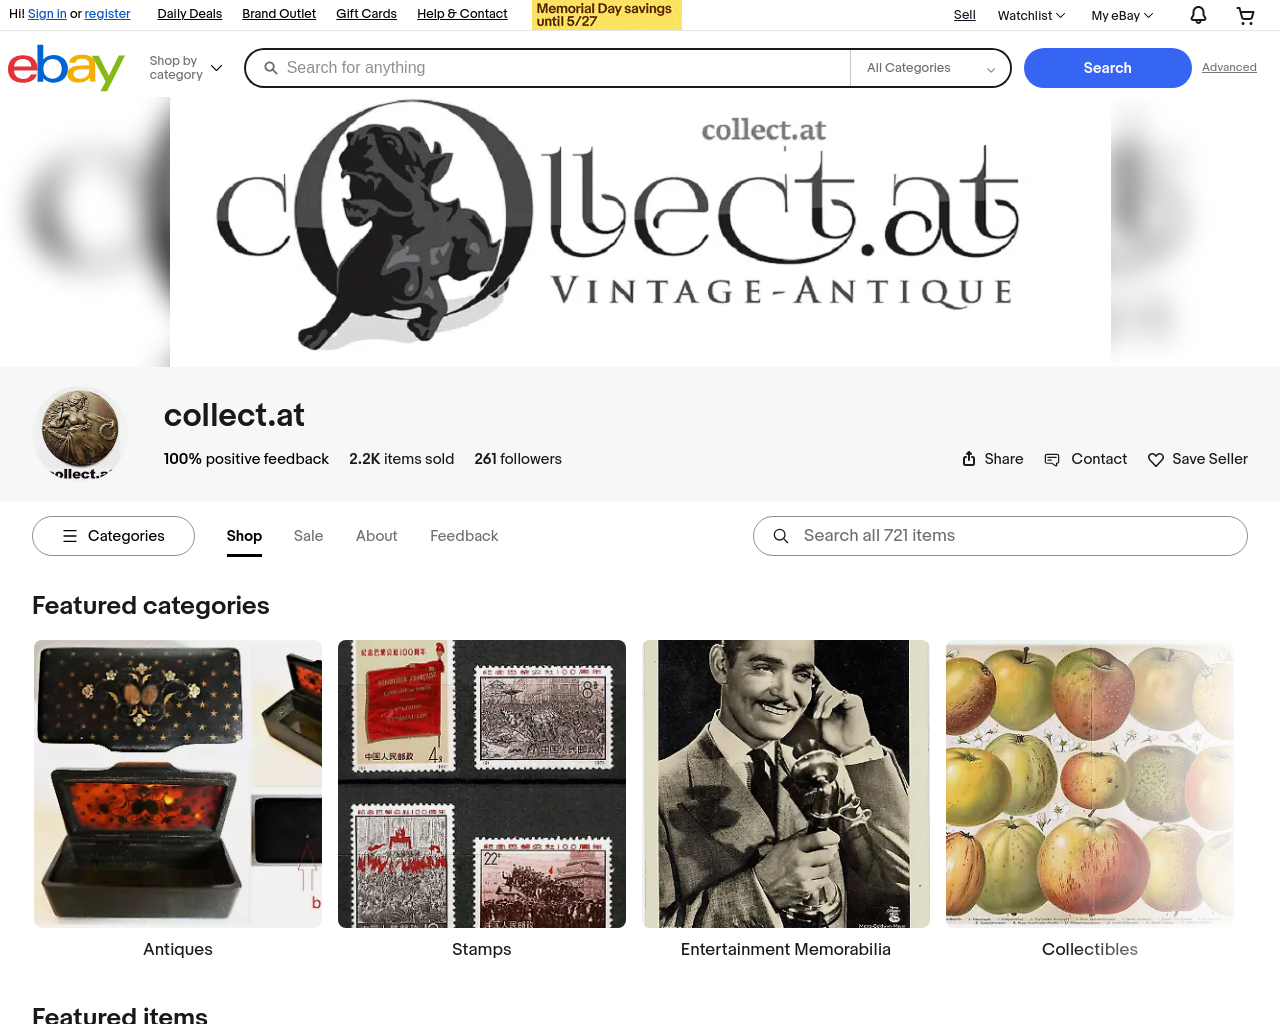 collect.at